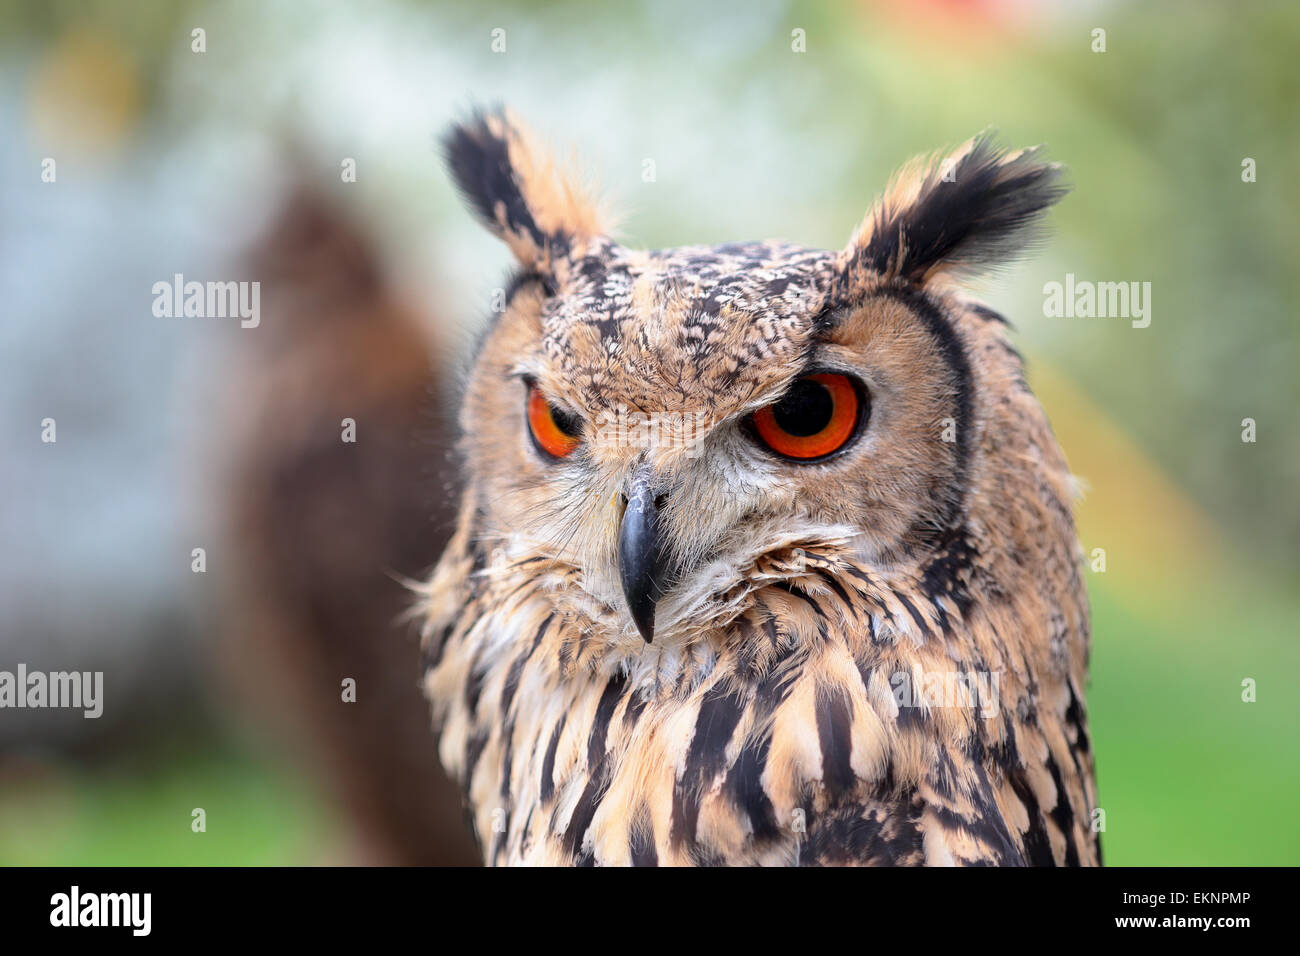 Portrait of an indian eagle-owl, Bubo bengalensis, looking ahead Stock Photo